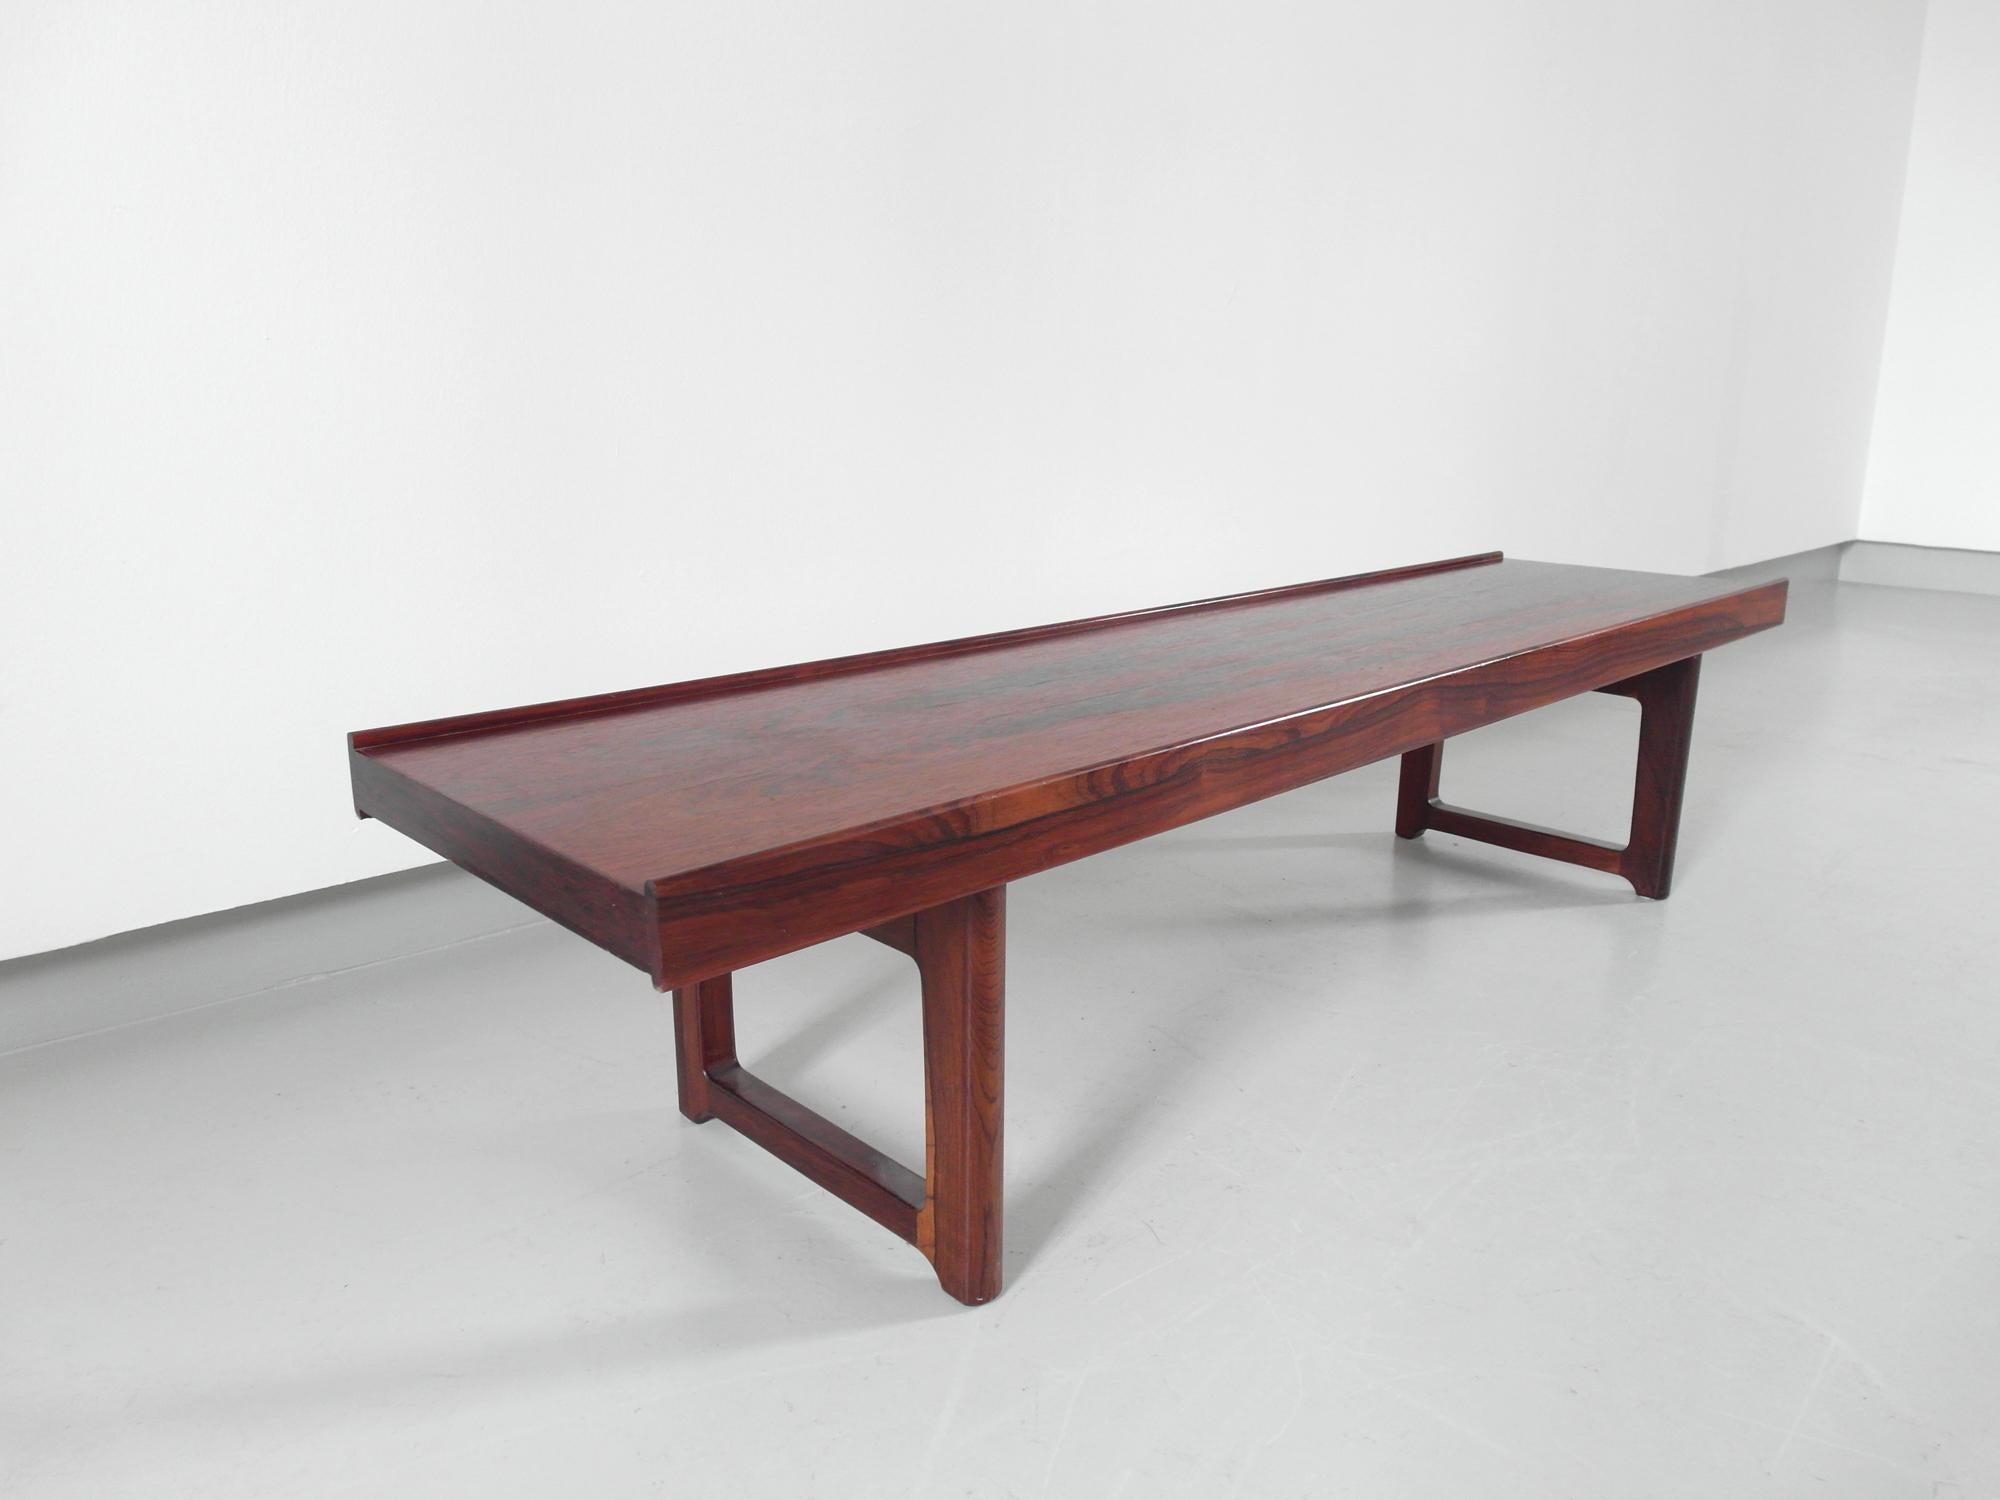 Vintage rosewood Krobo bench designed by Torbjørn Afdal, produced by Bruksbo, Norway 1960.
In 1960 Torbjørn Afdal designed this multipurpose Krobo bench. It became an instant Classic because of its unique flexibility and many uses. This is for a